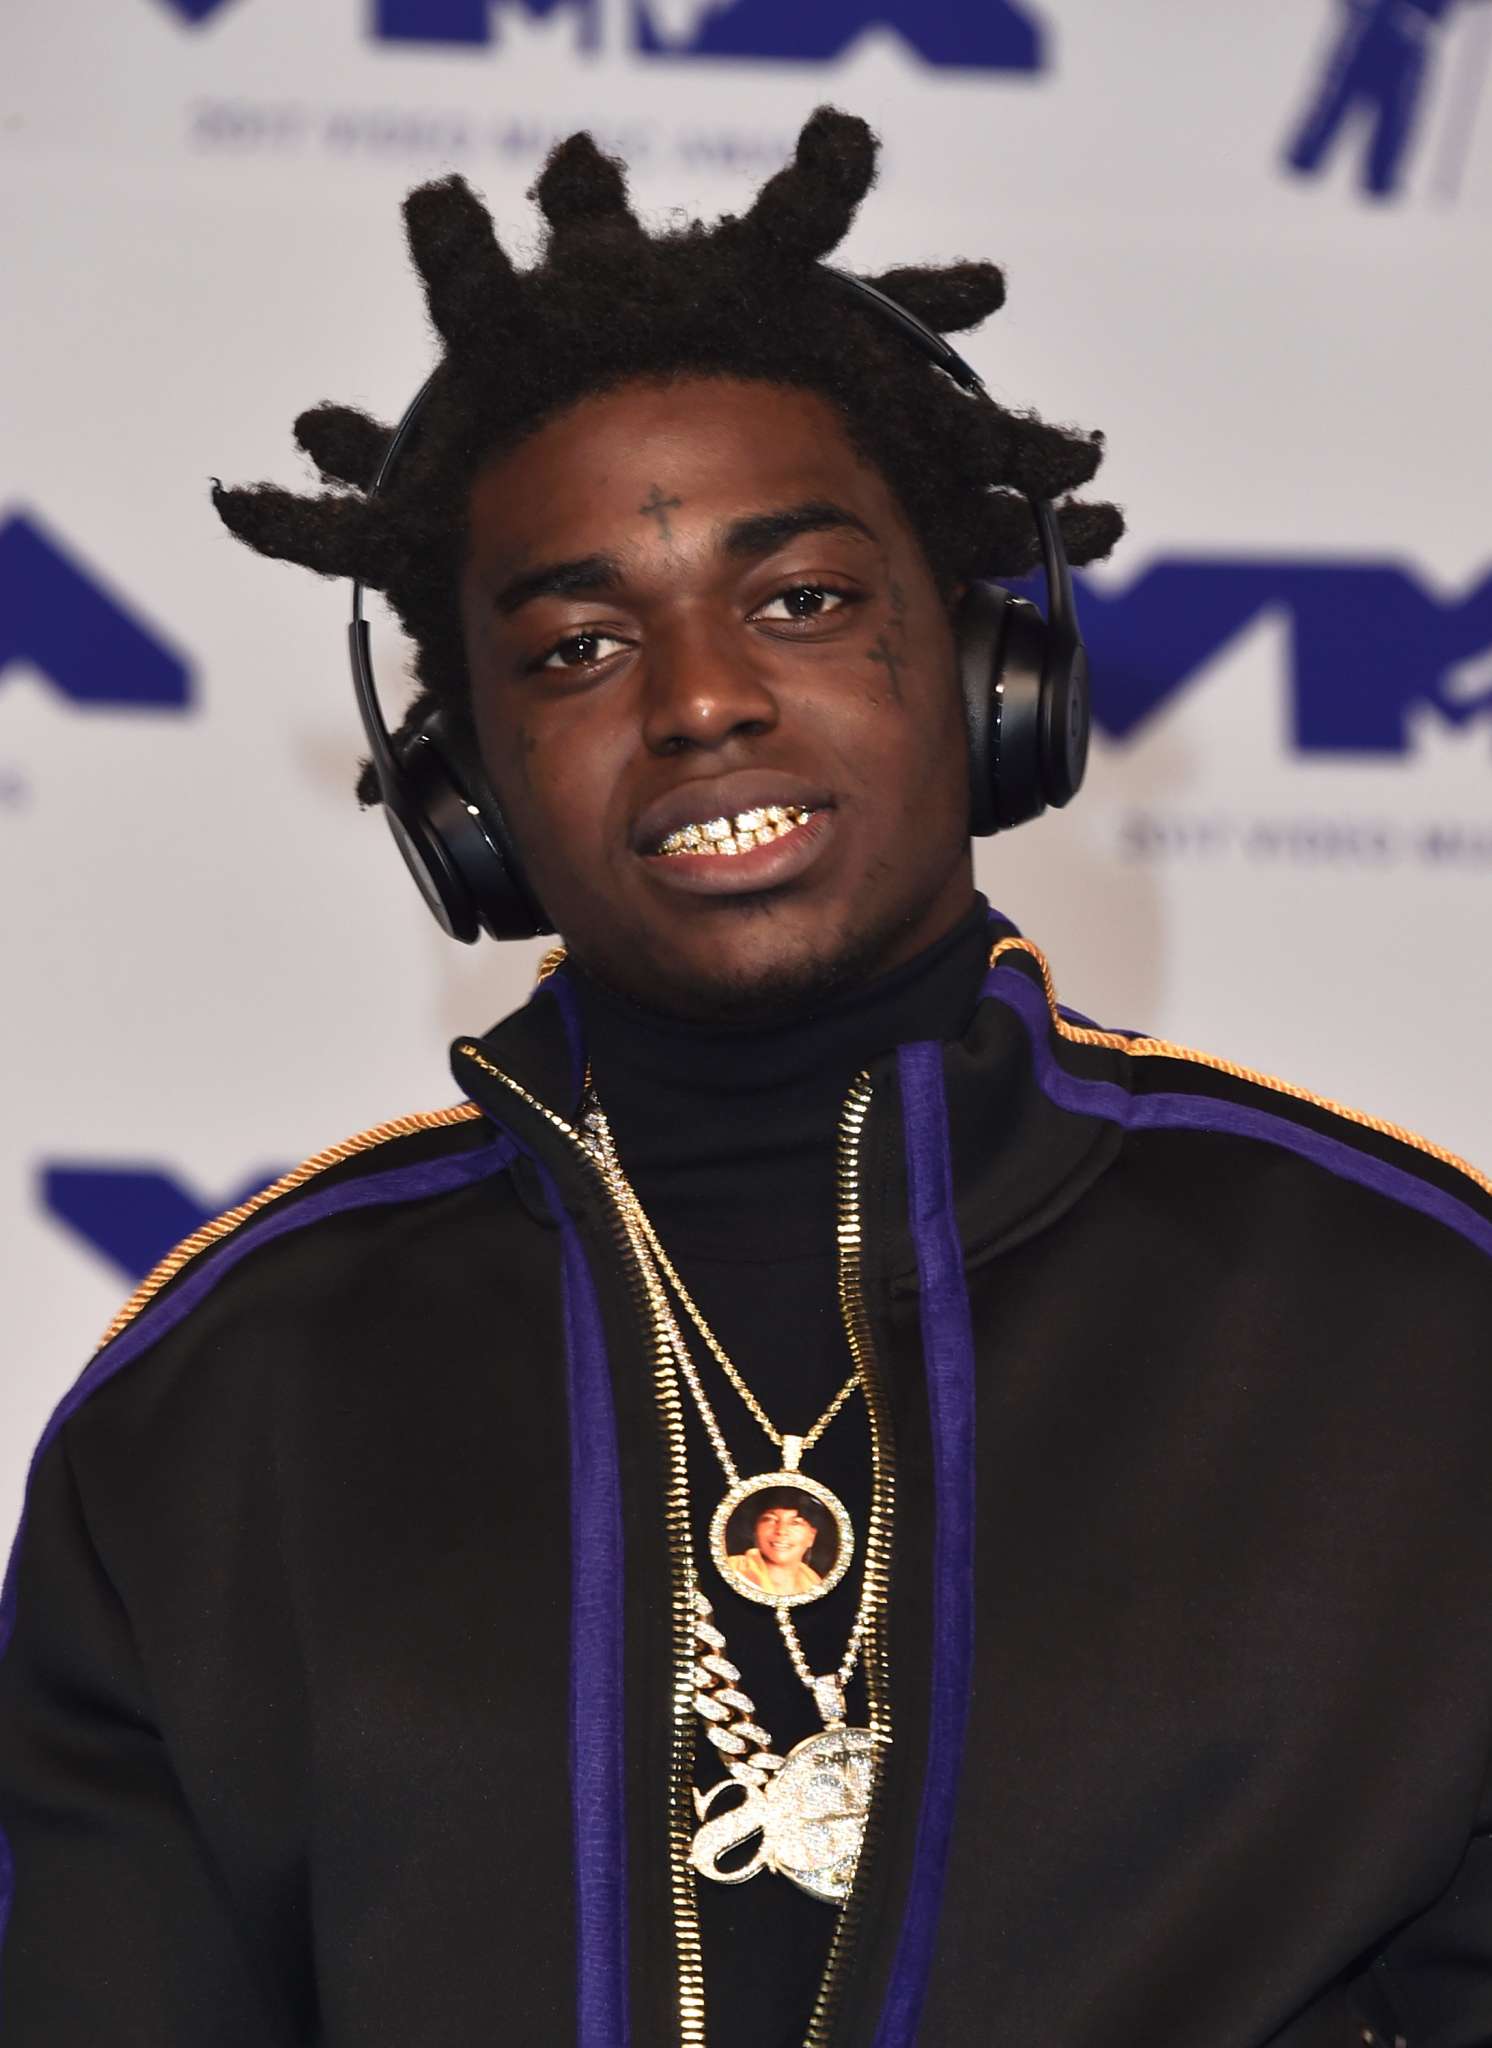 ”kodak-black-reassures-his-loved-ones-he-is-not-suicidal-following-latest-reports”